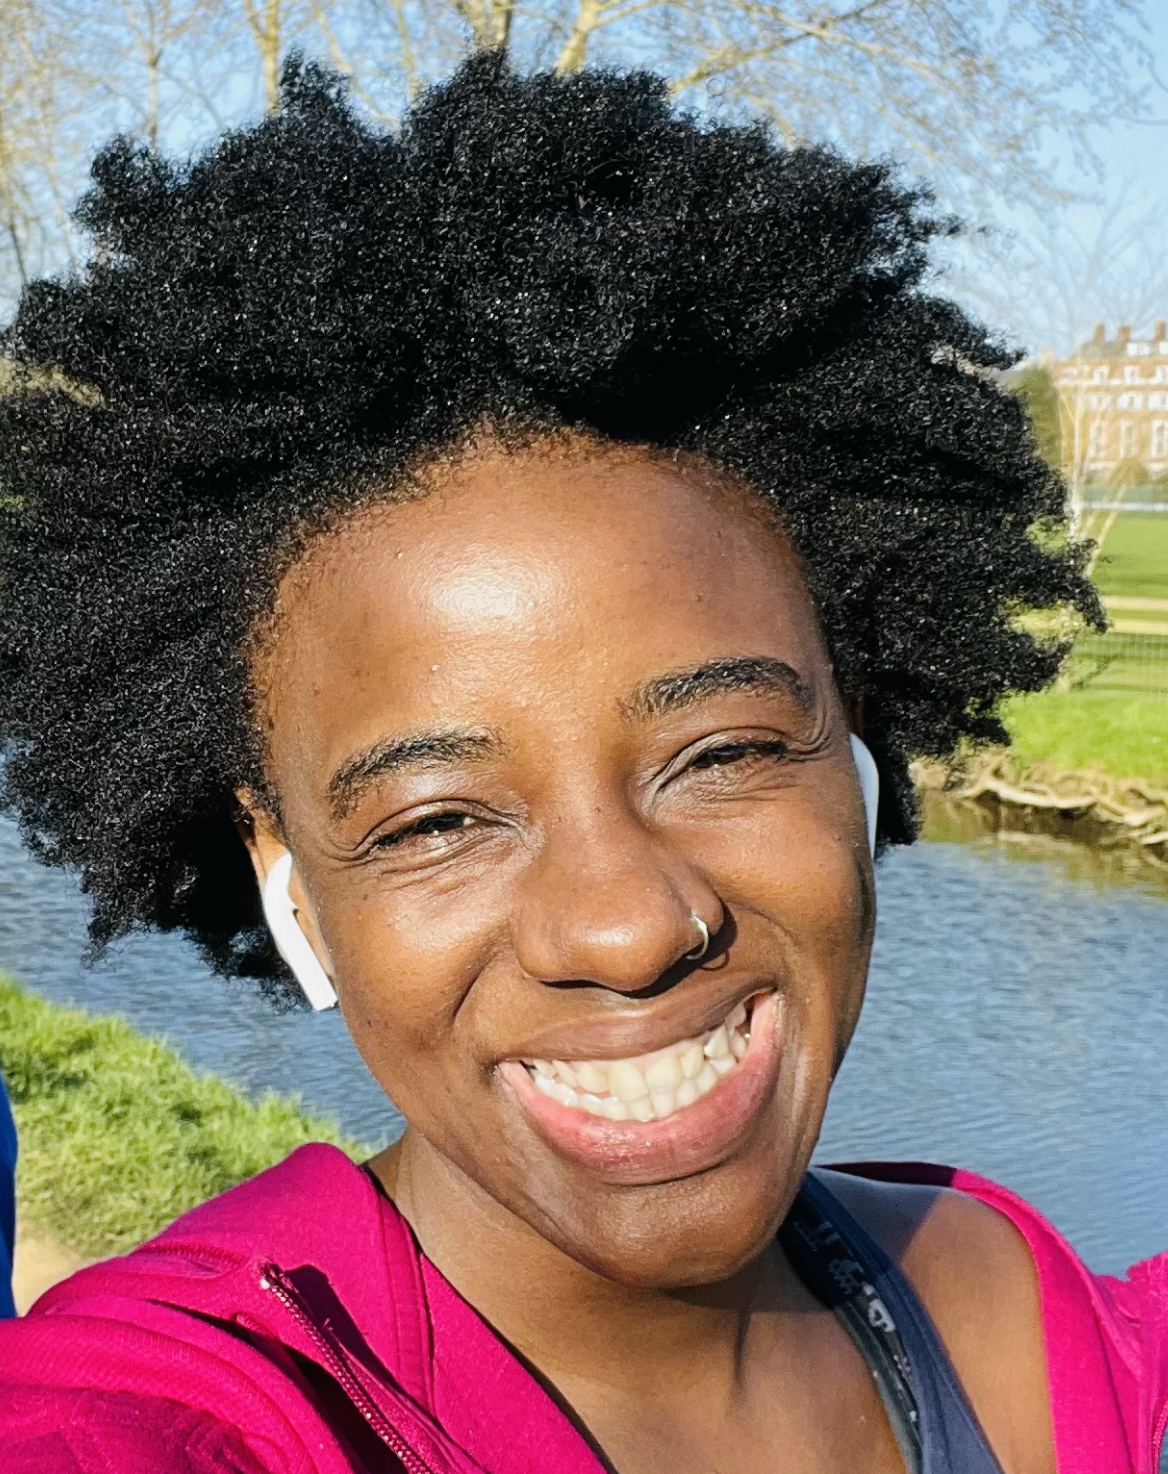 Nokuzola smiling with a grassy riverbank in the background.